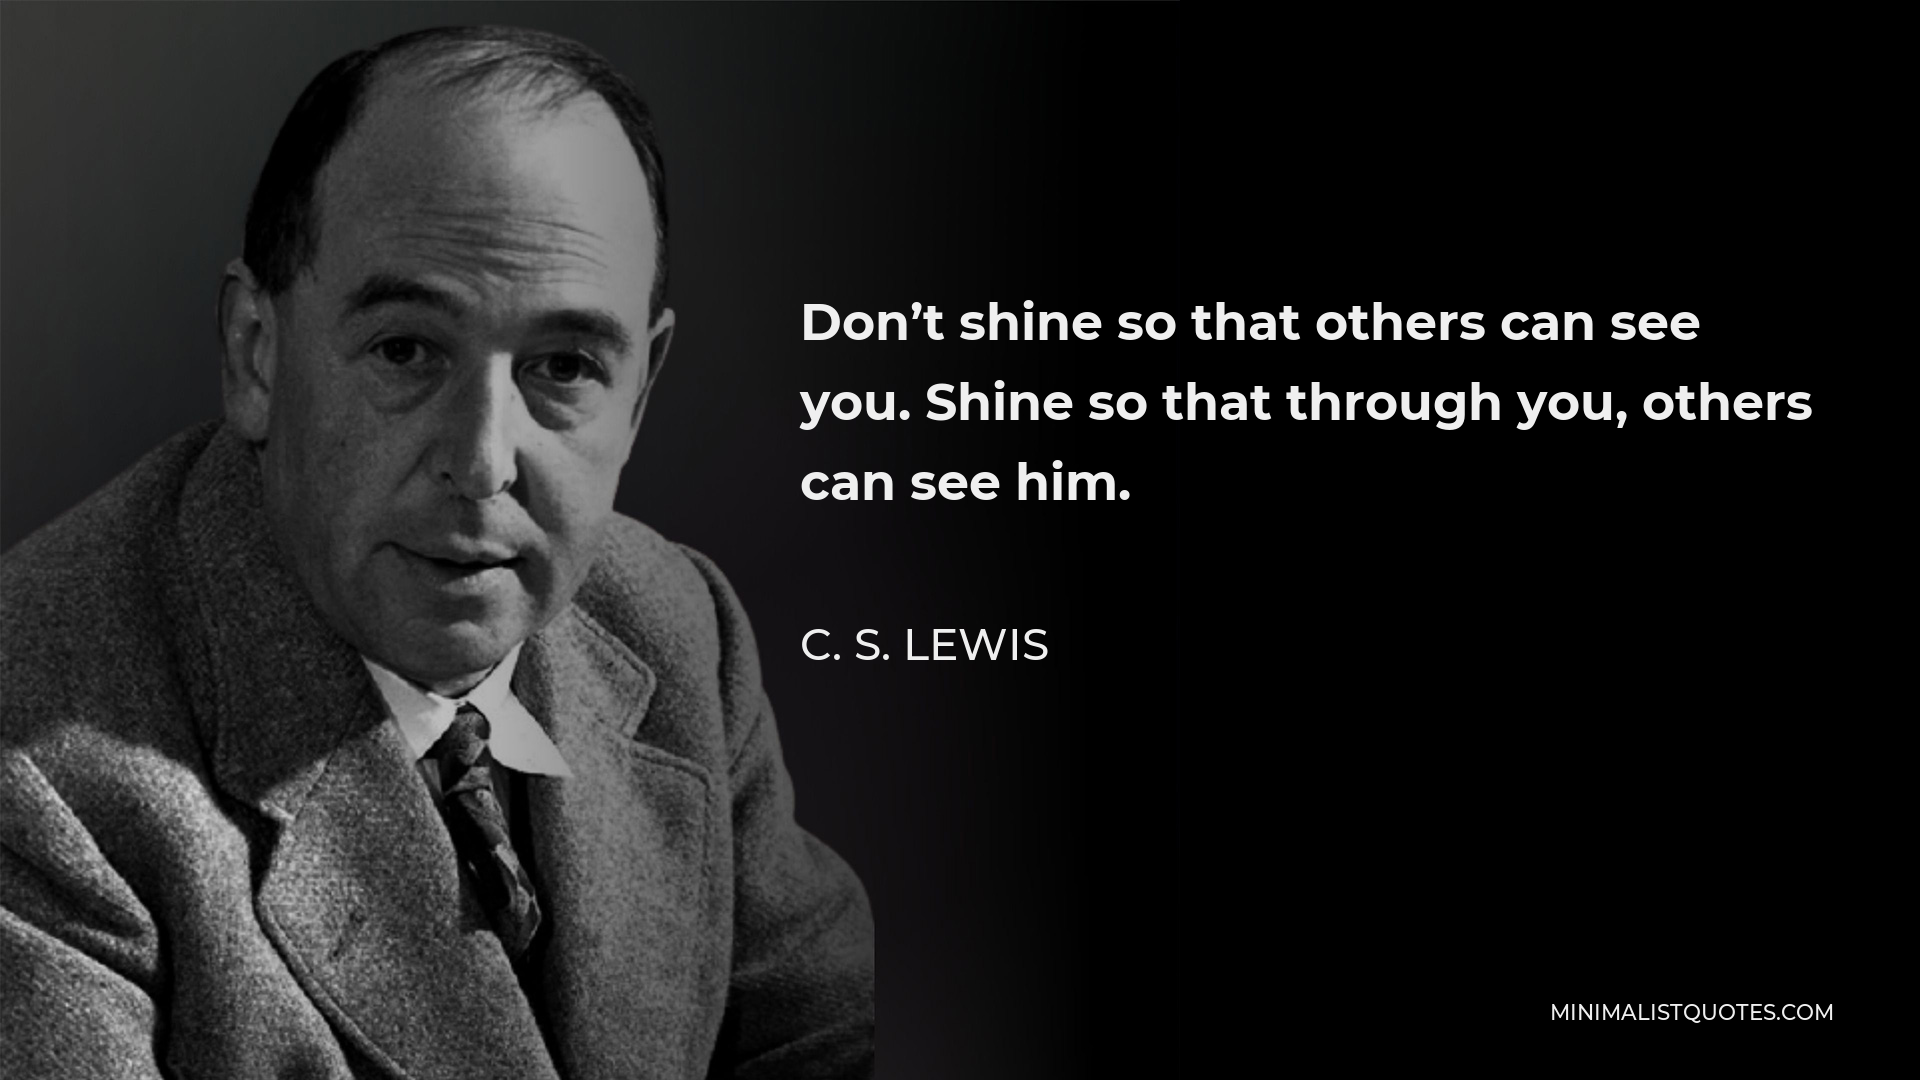 C. S. Lewis Quote - Don’t shine so that others can see you. Shine so that through you, others can see him.